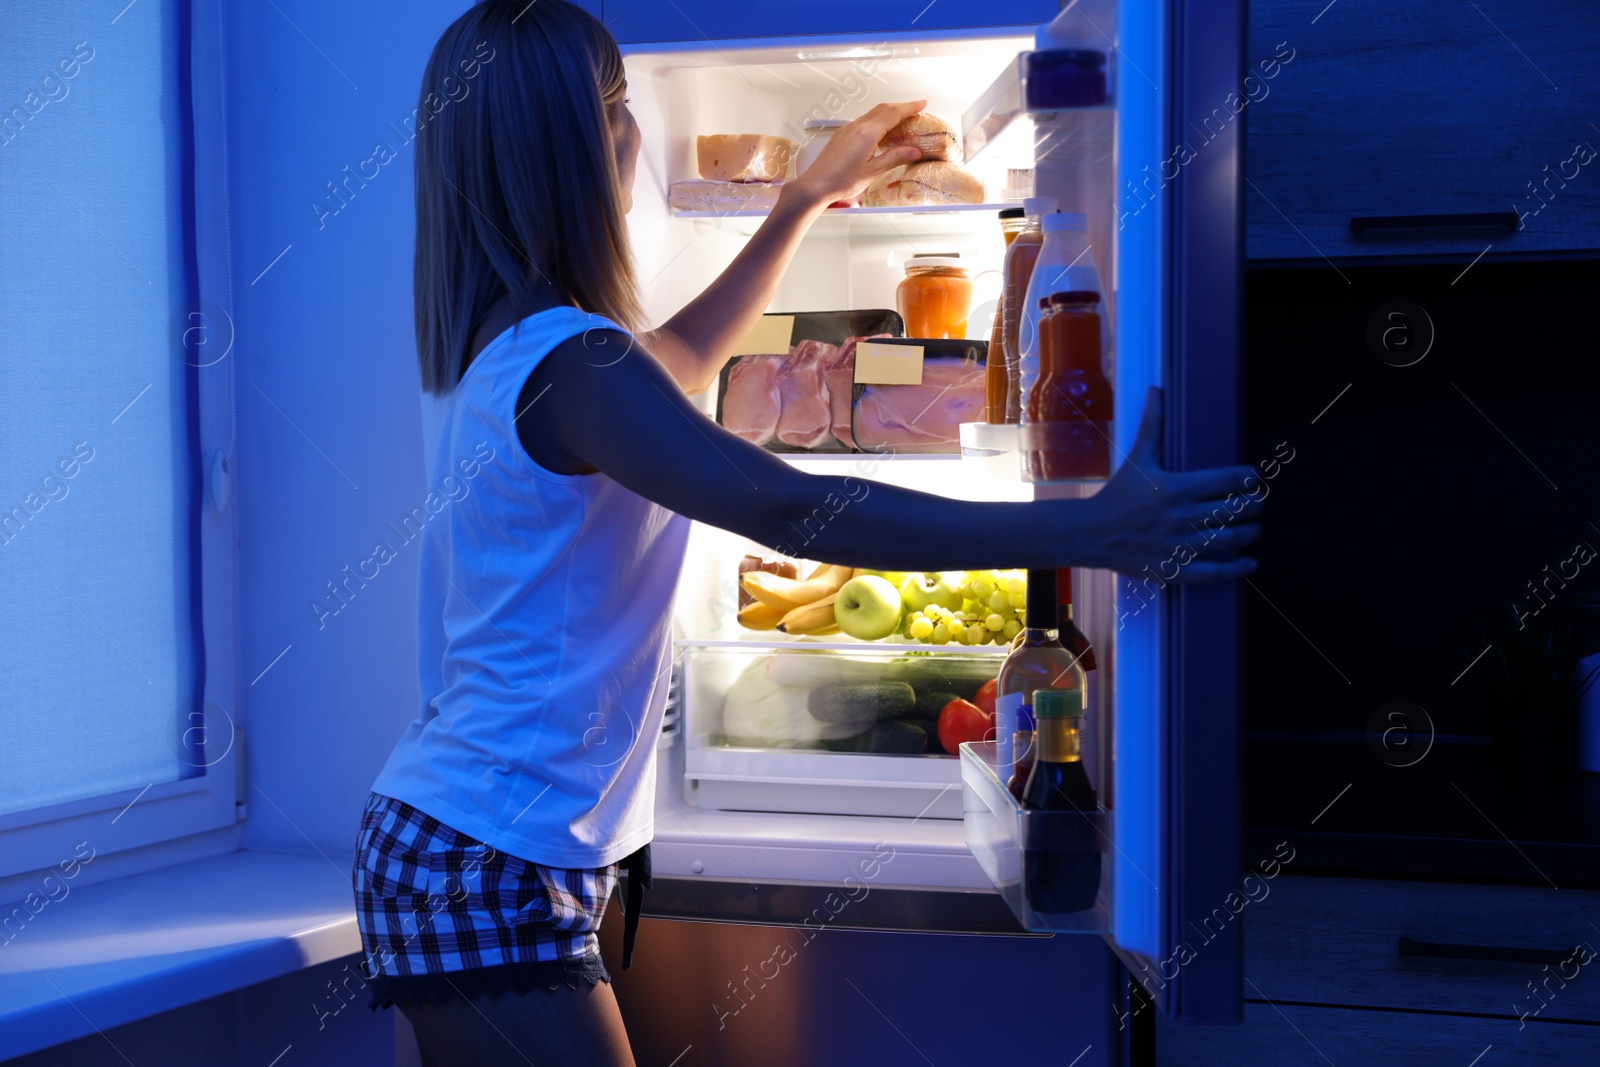 Photo of Woman taking products out of refrigerator in kitchen at night